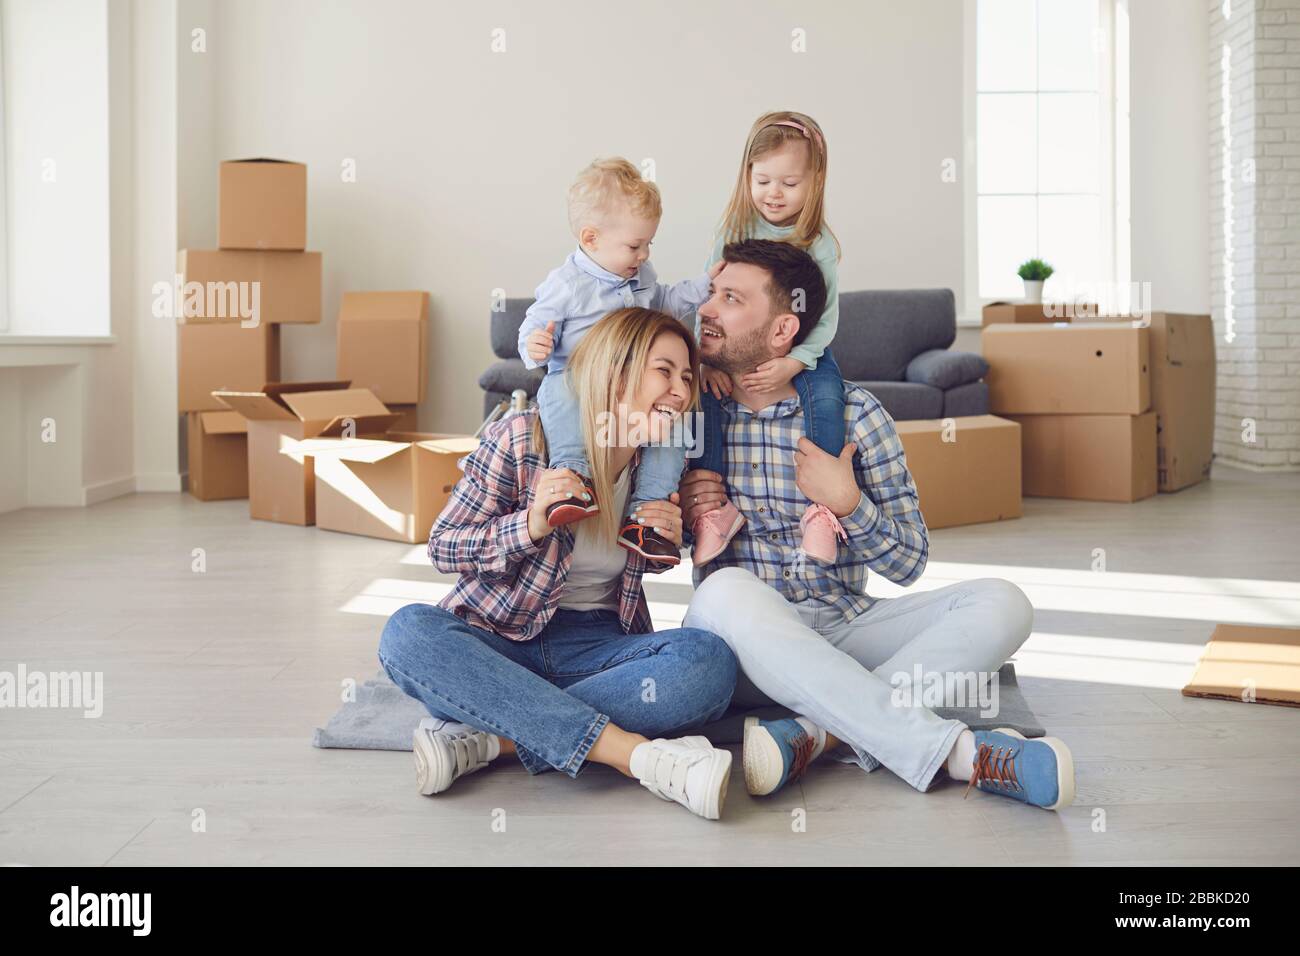 Happy family smiling at a new house moving. Stock Photo